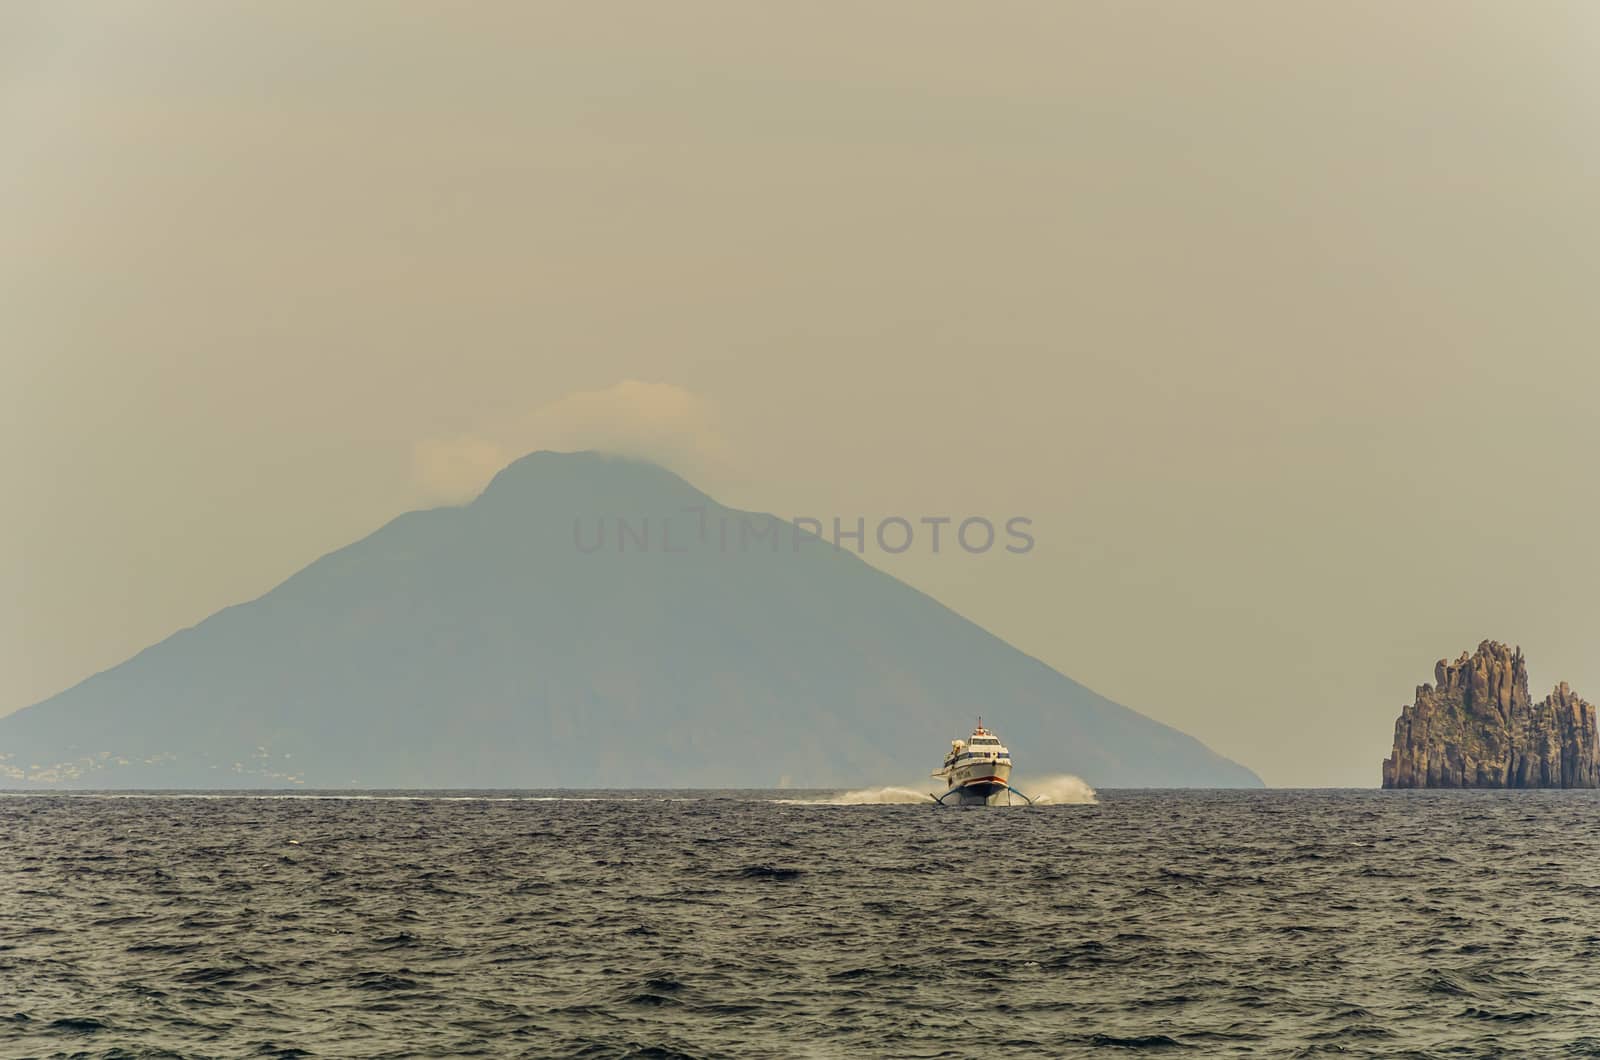 Sea tyrrhenian  boat catamaran rock volcanic emerging from the sea and in the background volcano stromboli smoking from the island panarea